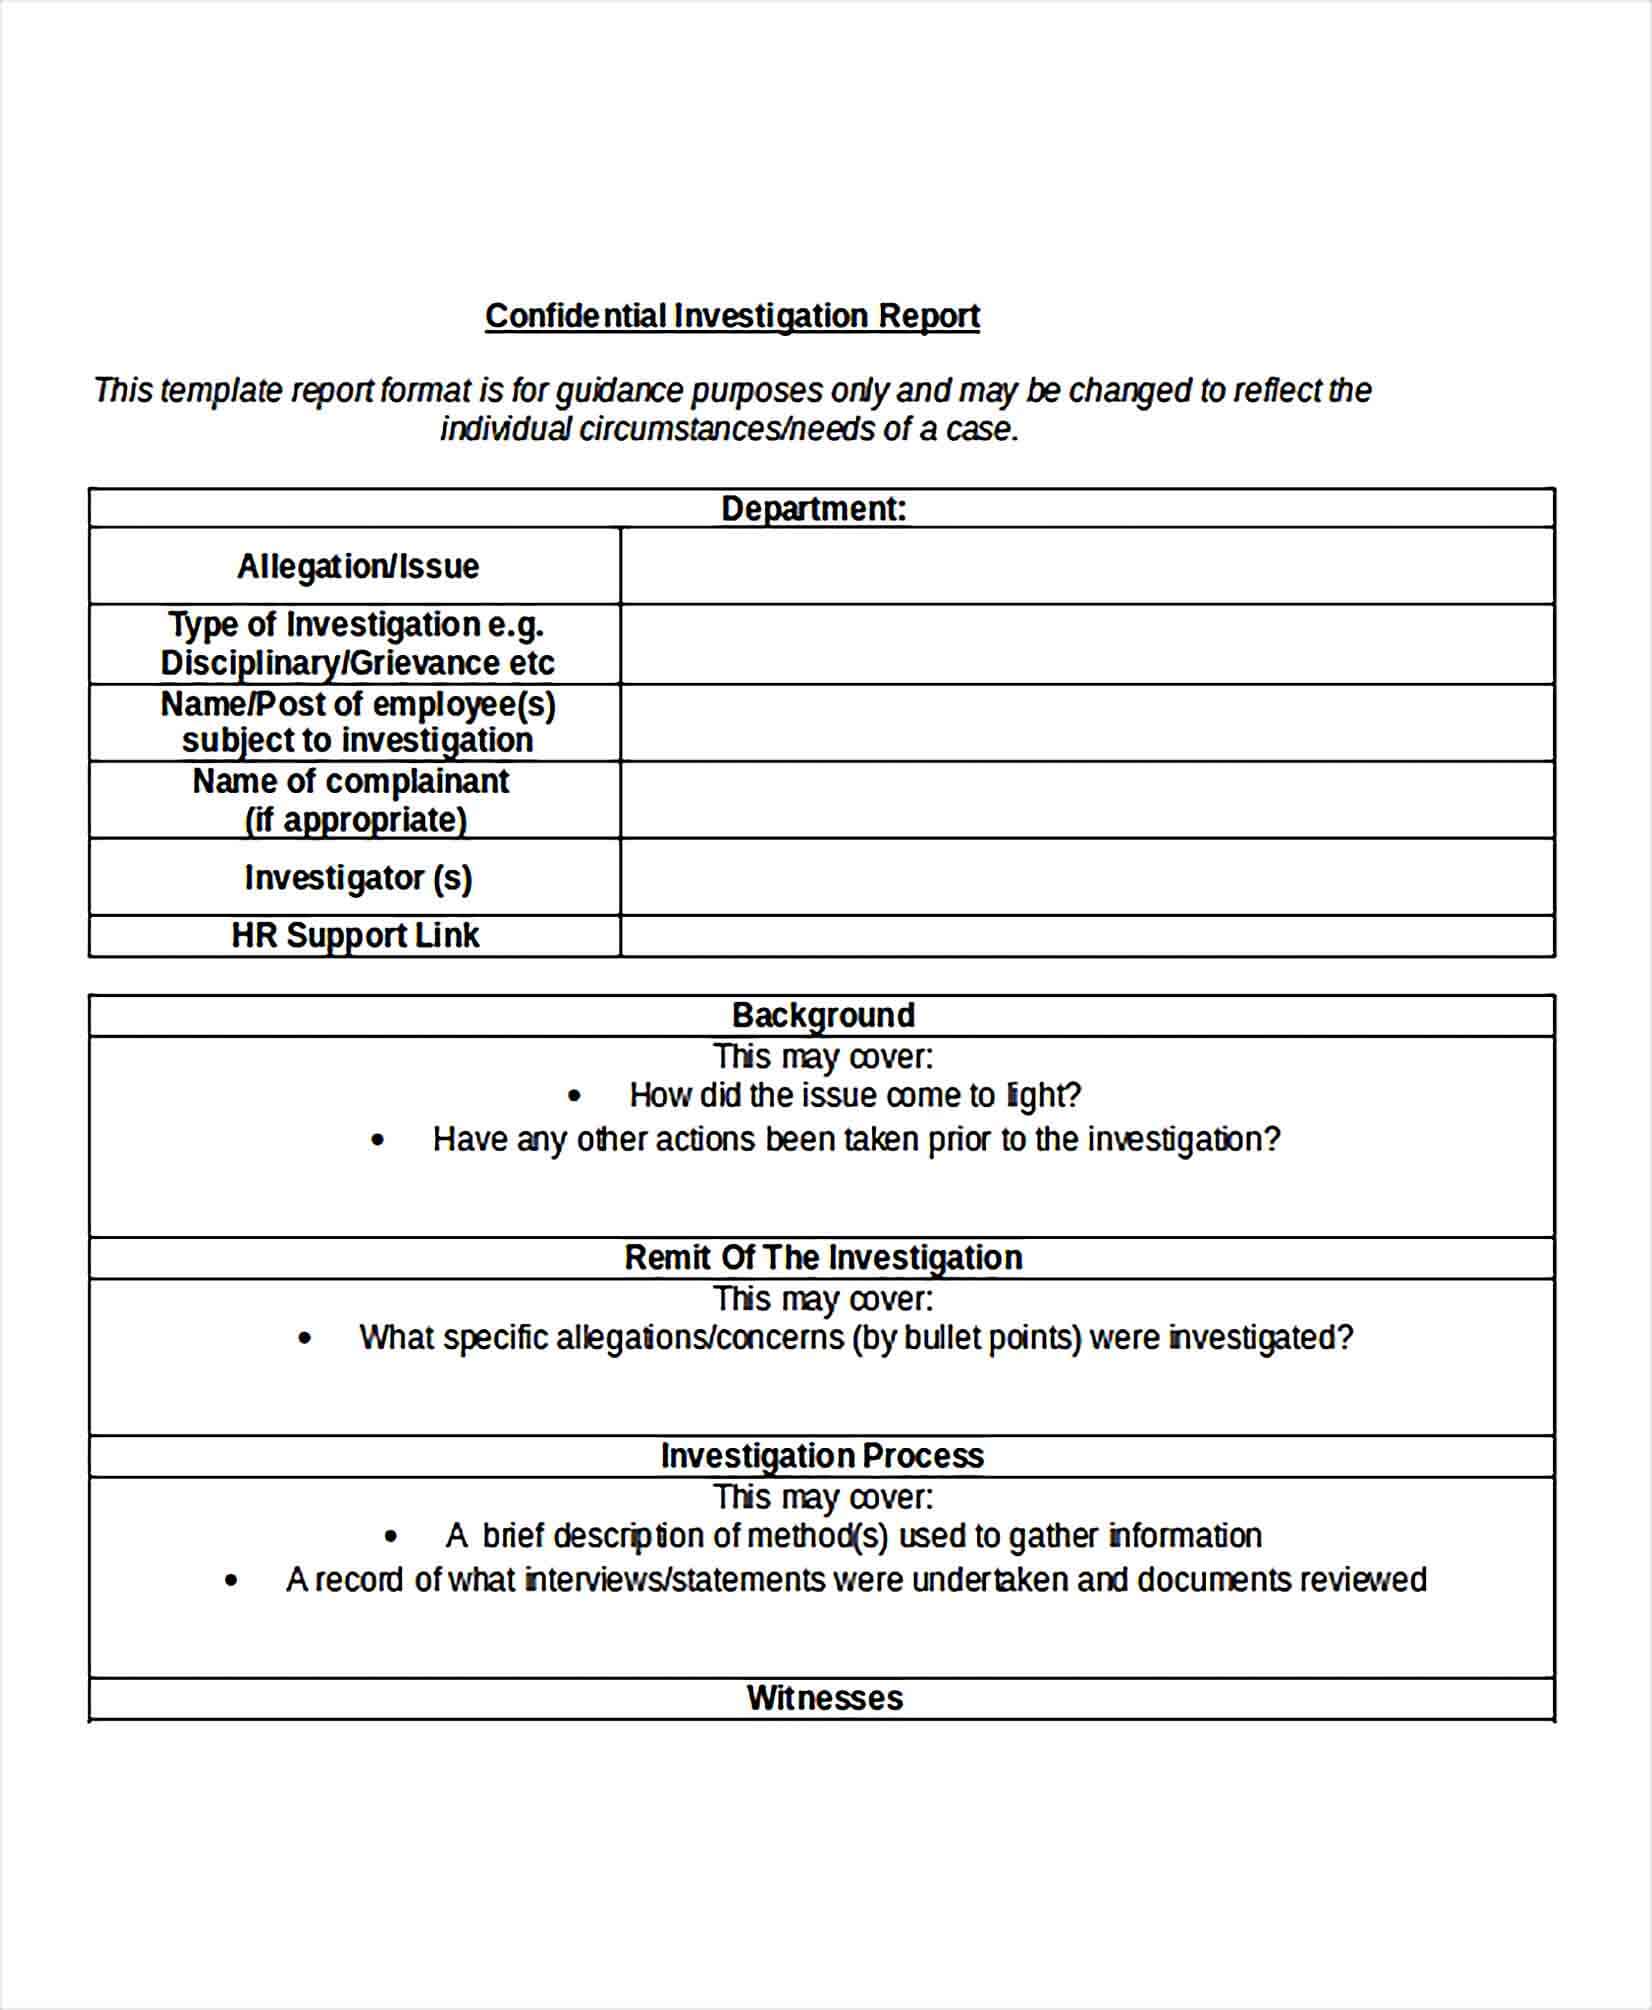 Sample Confidential Investigation Report Form Template1